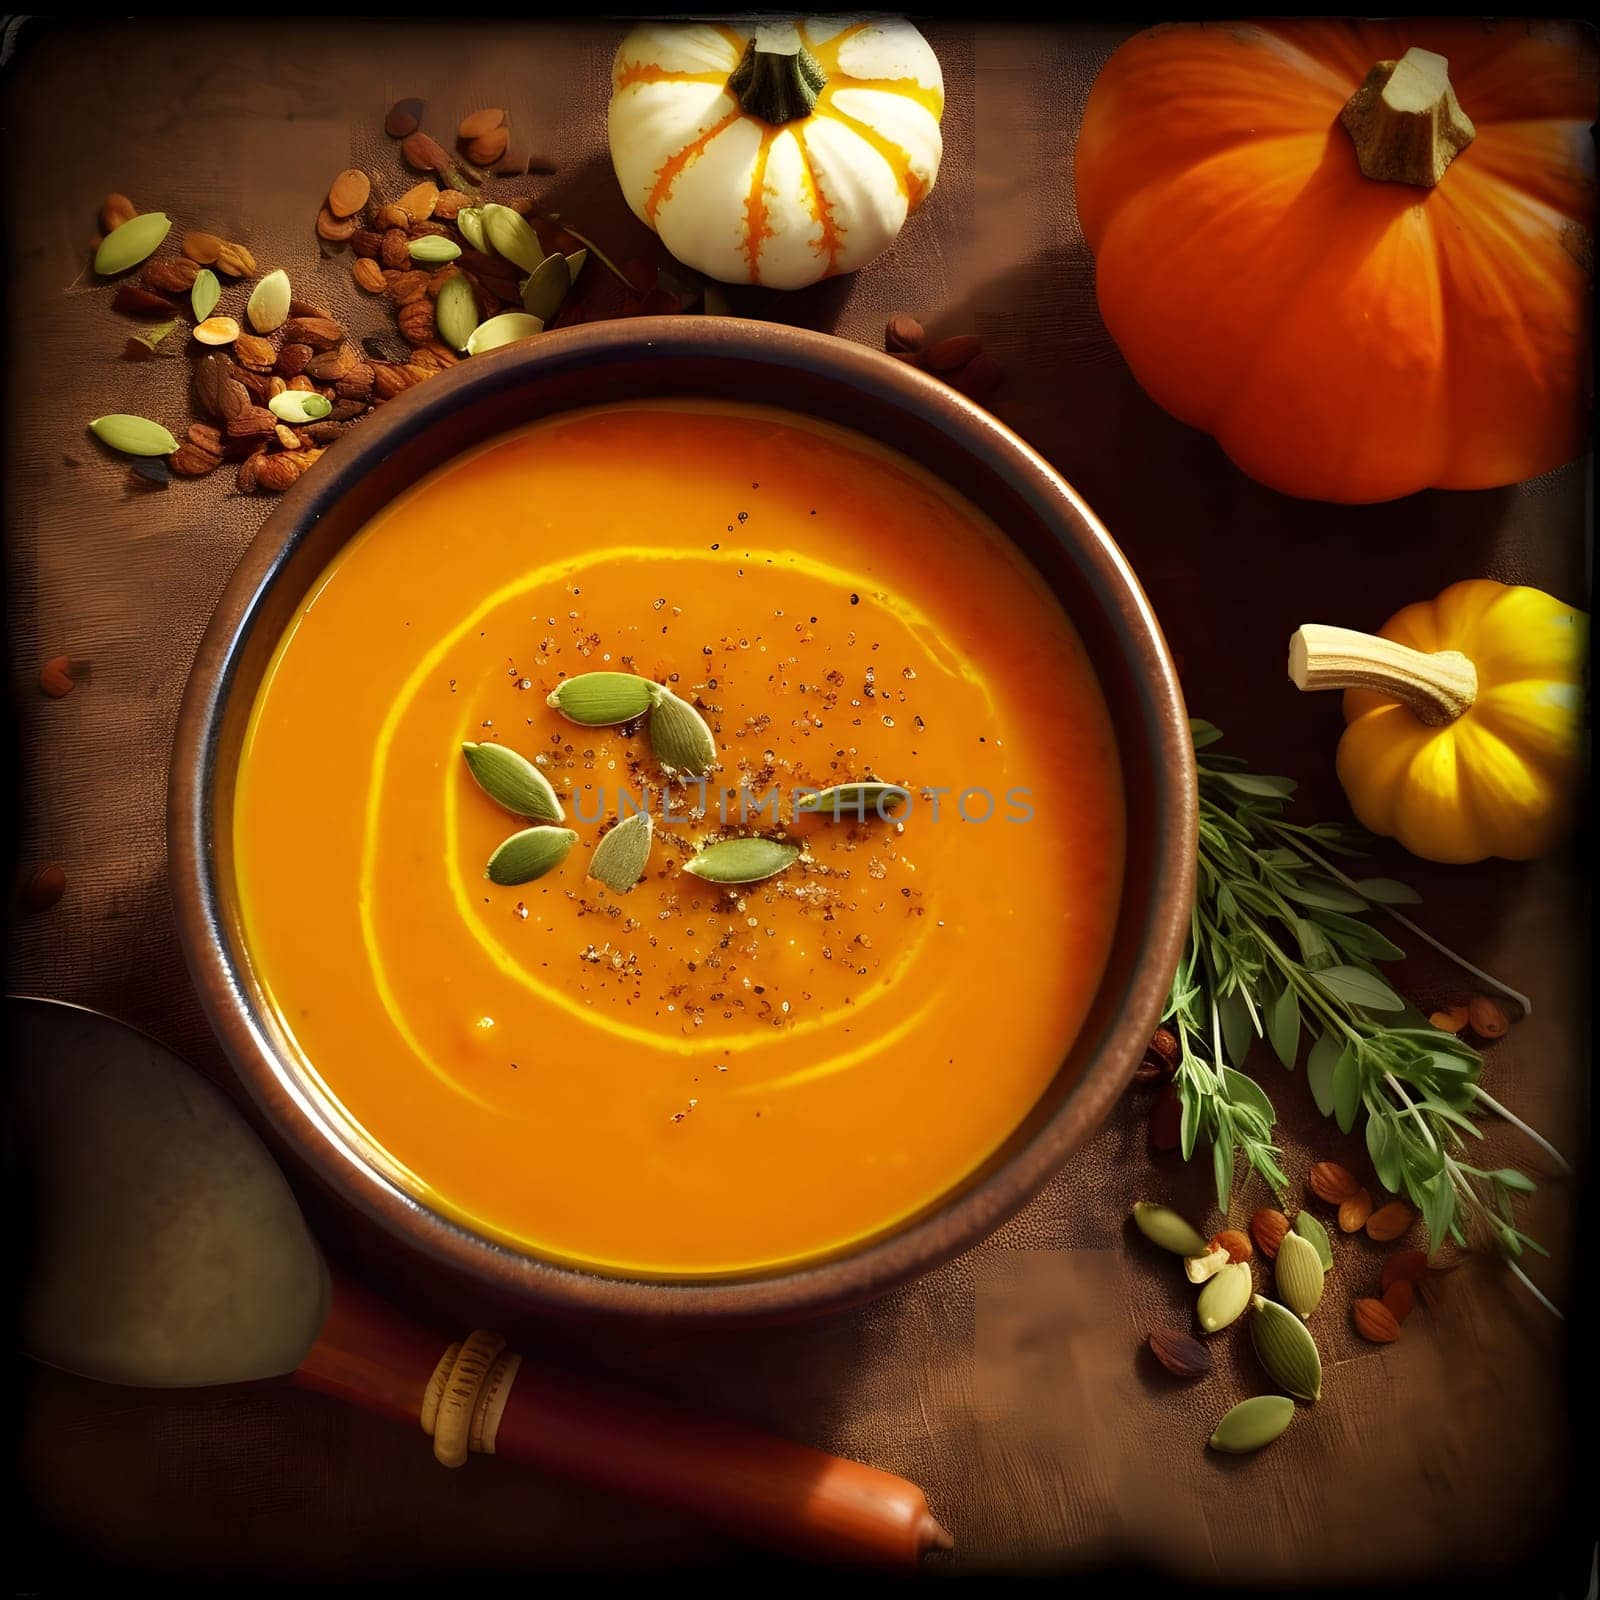 An aerial view of the day's soup and spiced seeds and pumpkins all around. Pumpkin as a dish of thanksgiving for the harvest. by ThemesS